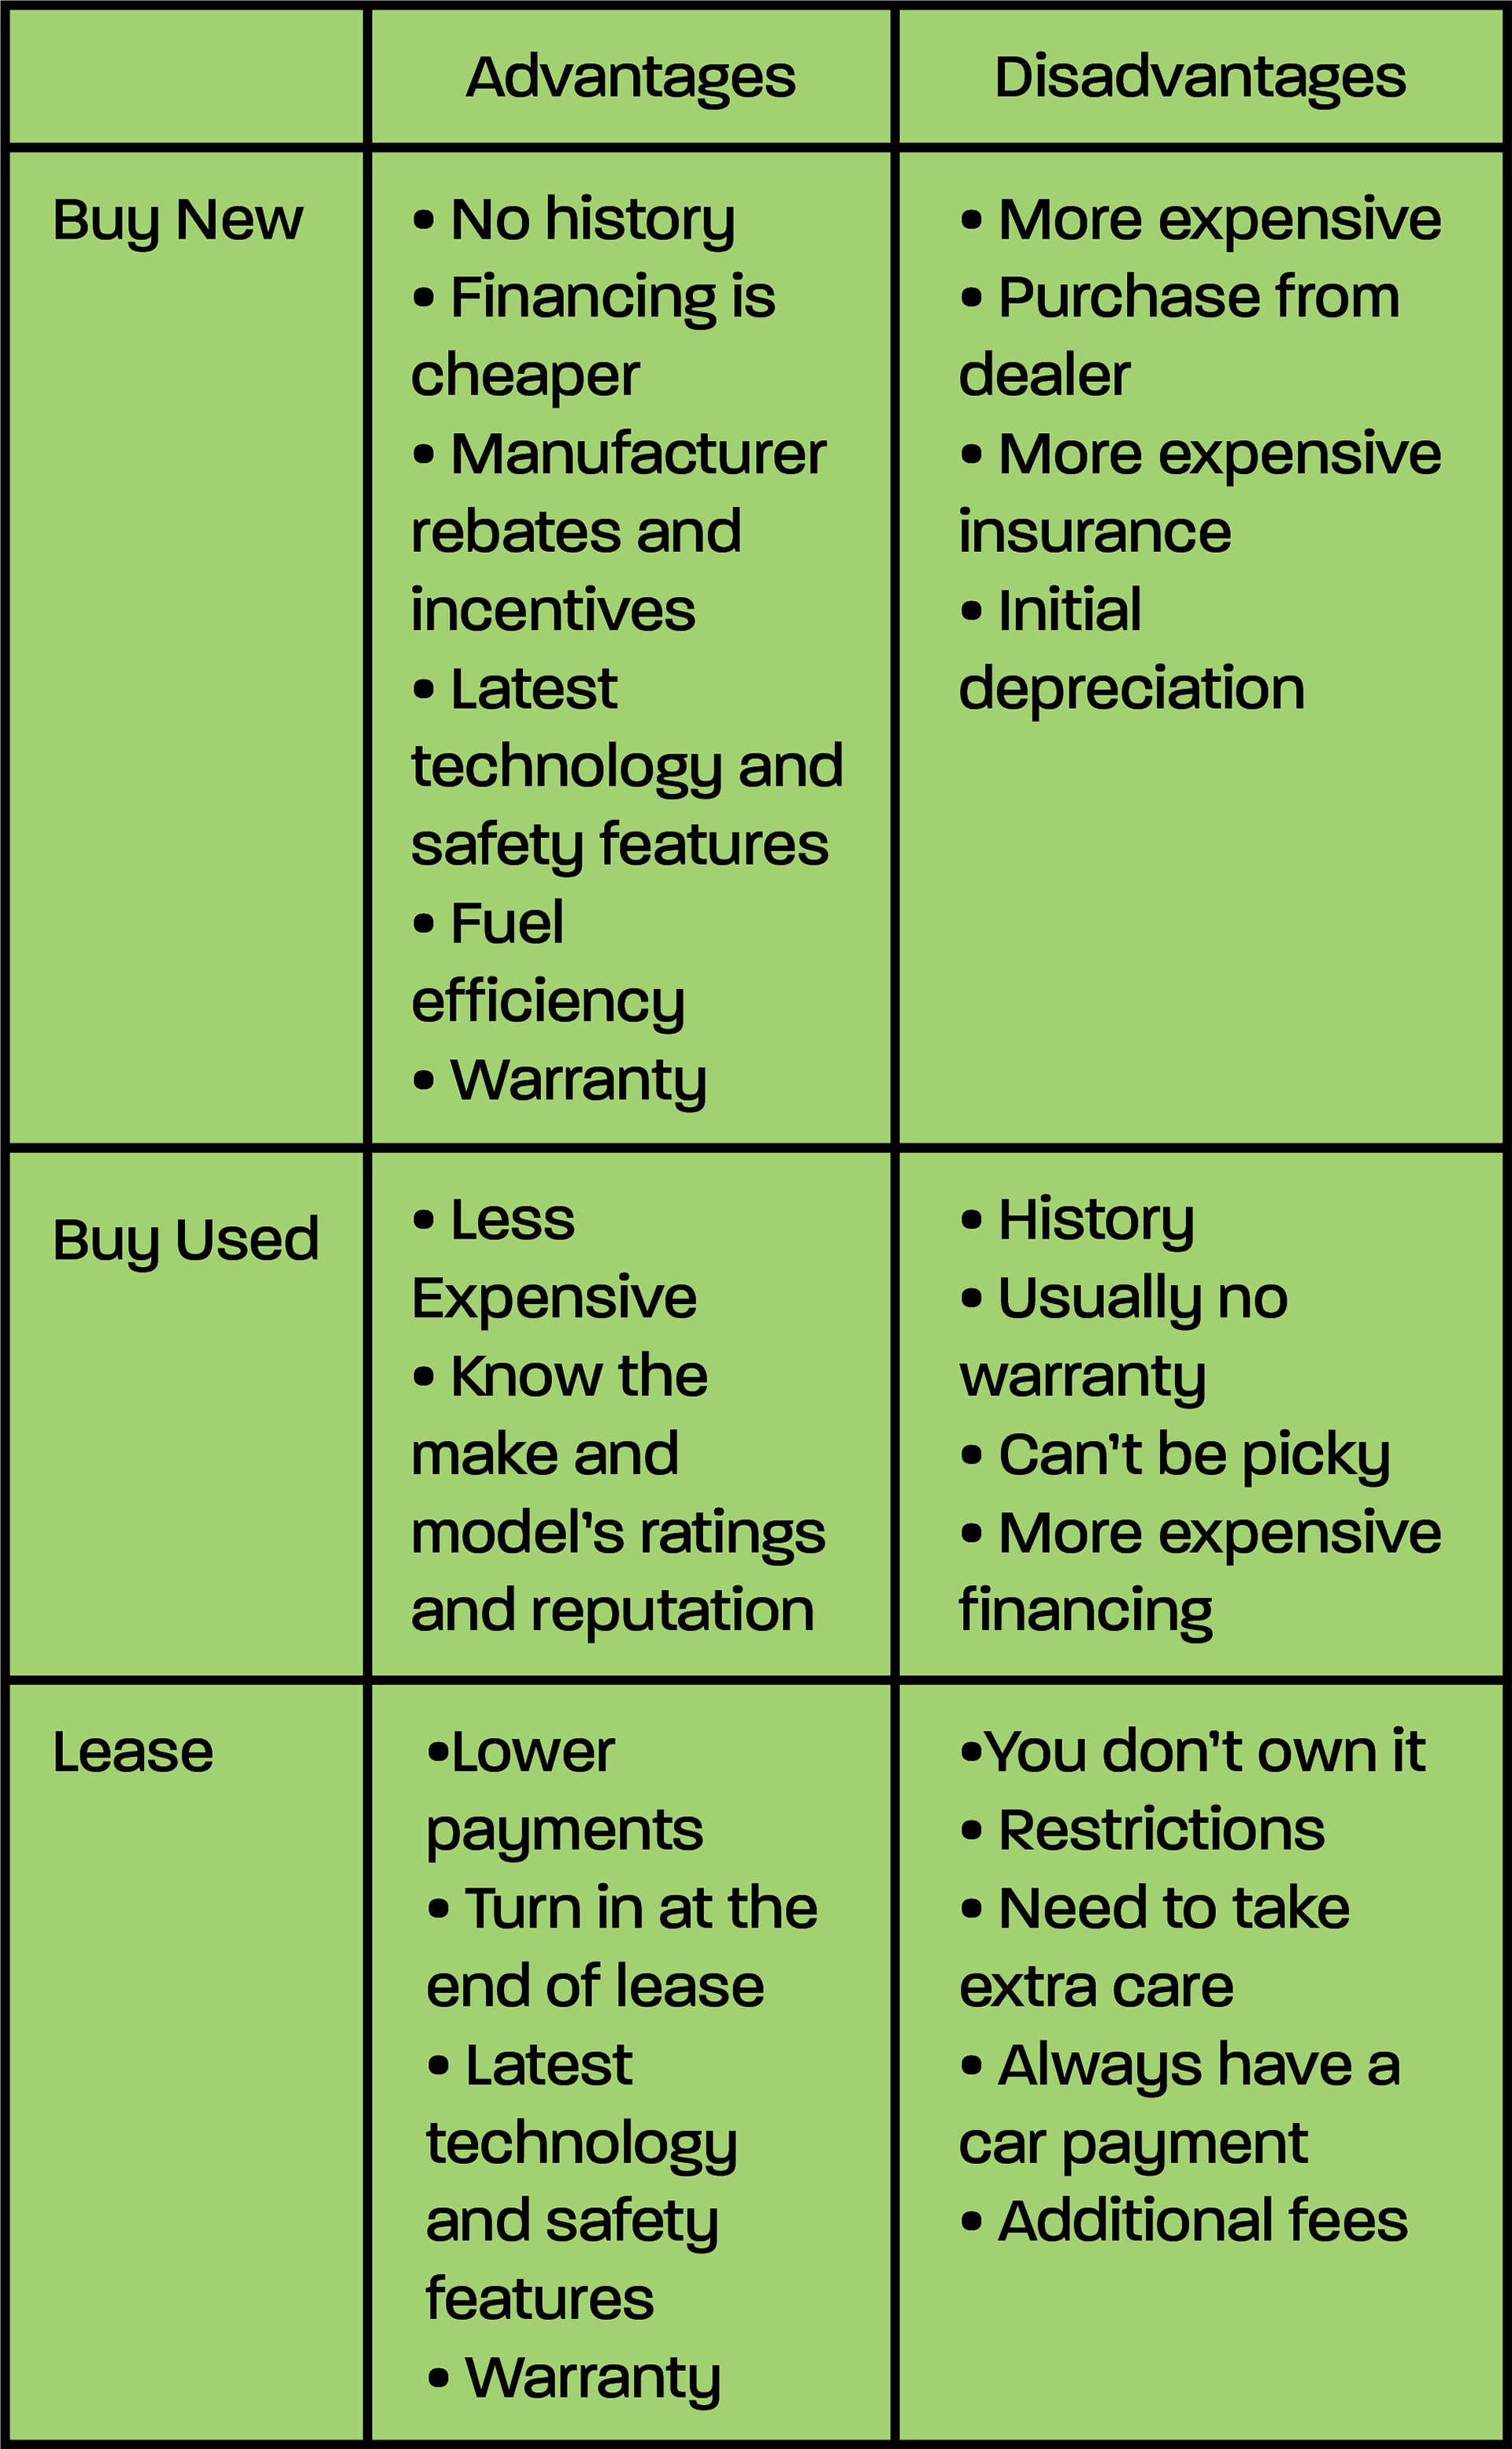 Advantages and Disadvantages of Buying New, Buying Used or Leasing